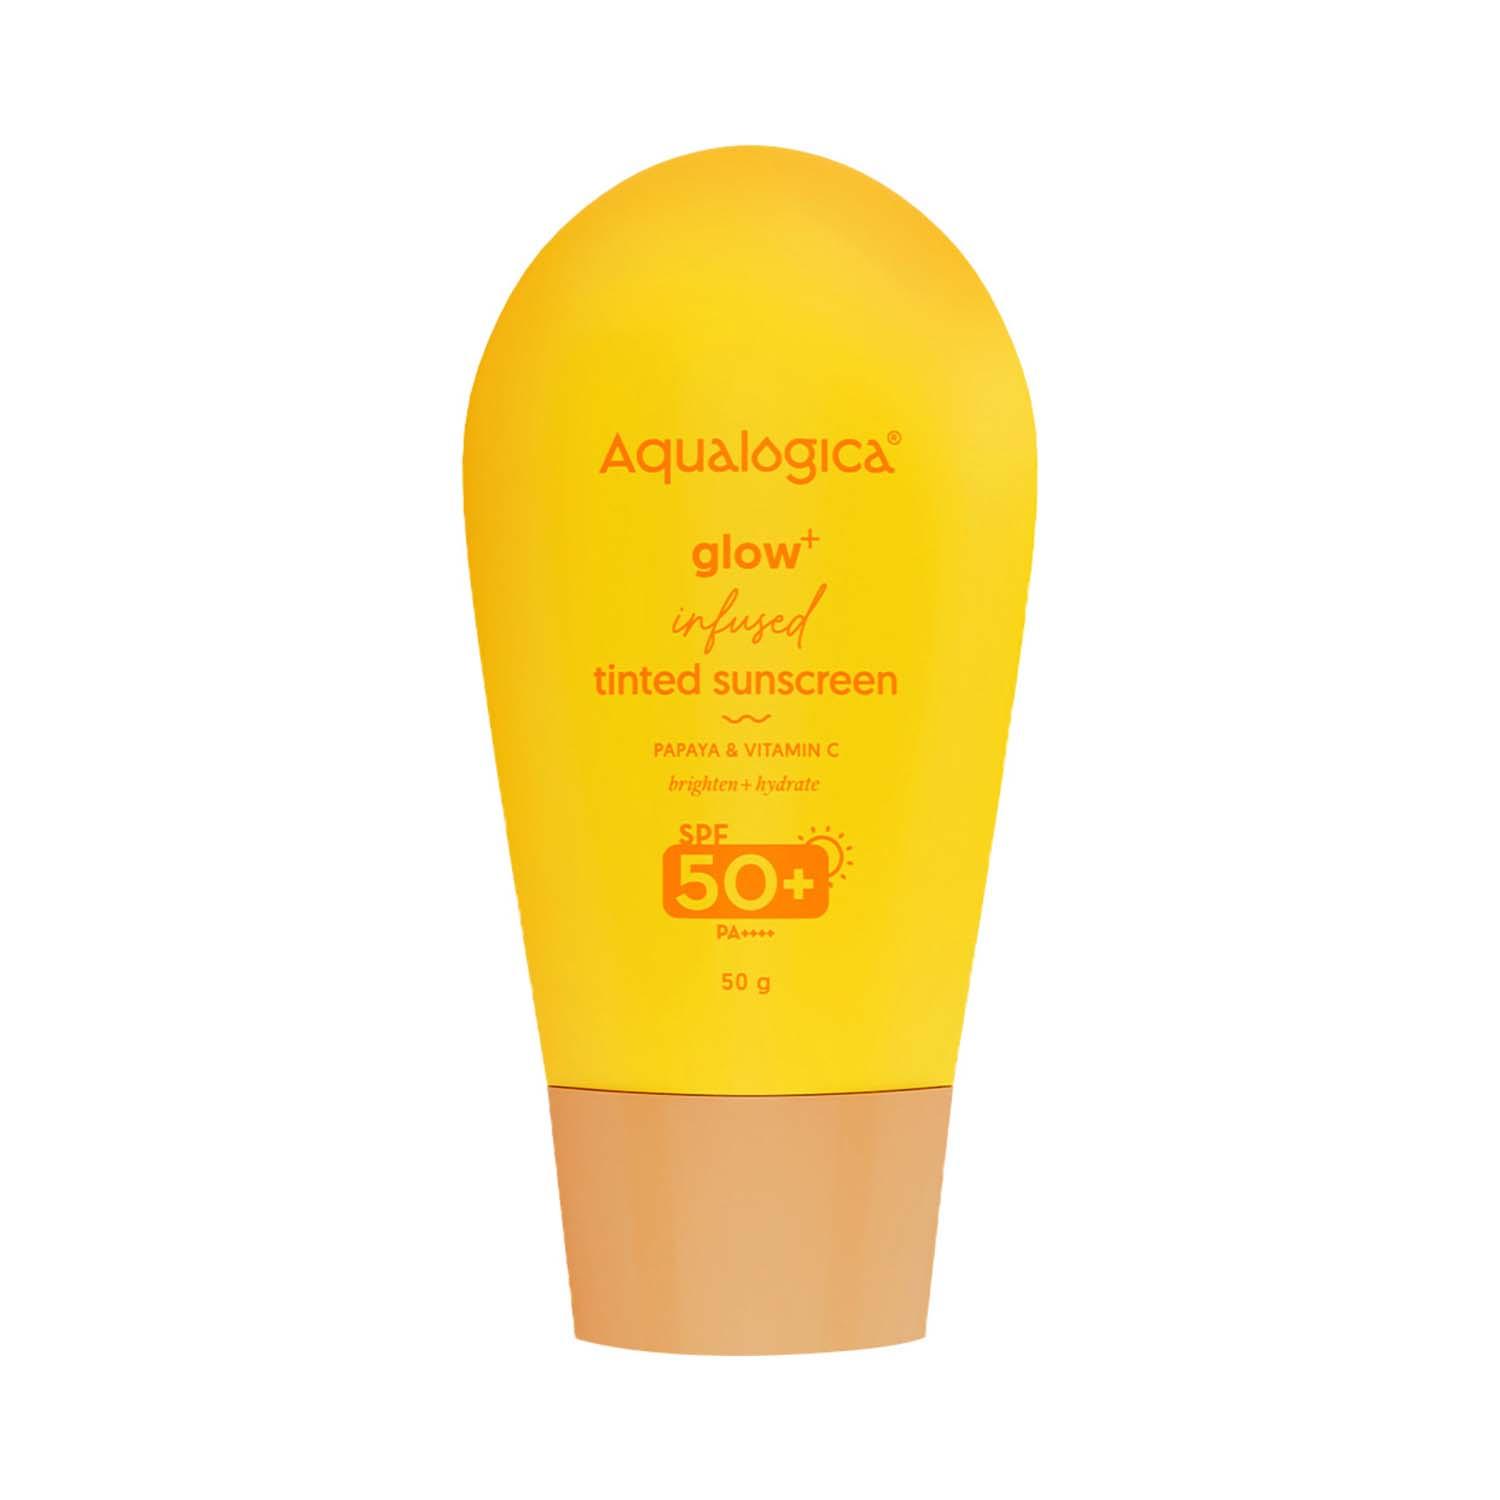 Aqualogica | Aqualogica Glow+ Infused Tinted Sunscreen With SPF 50+ PA++++ (50 g)